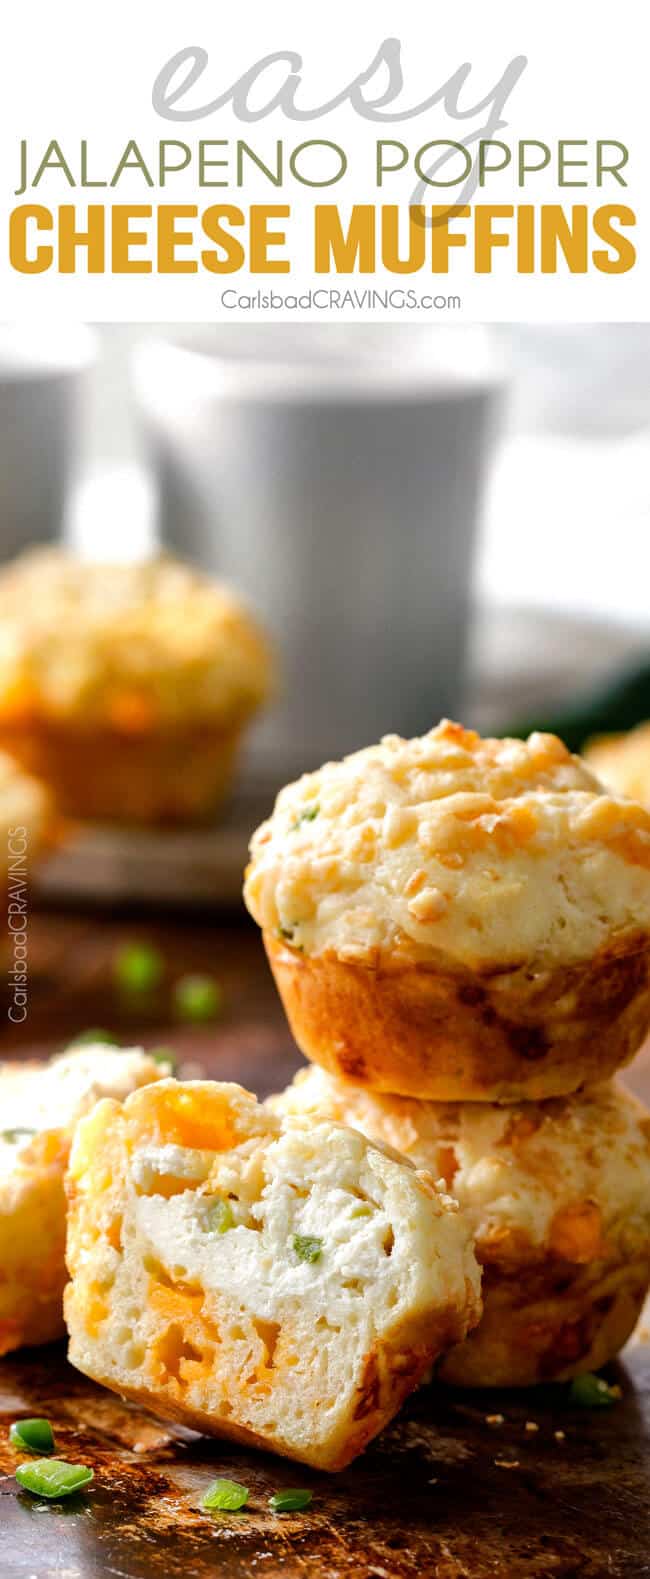 A Jalapeno Popper Cheese Muffins